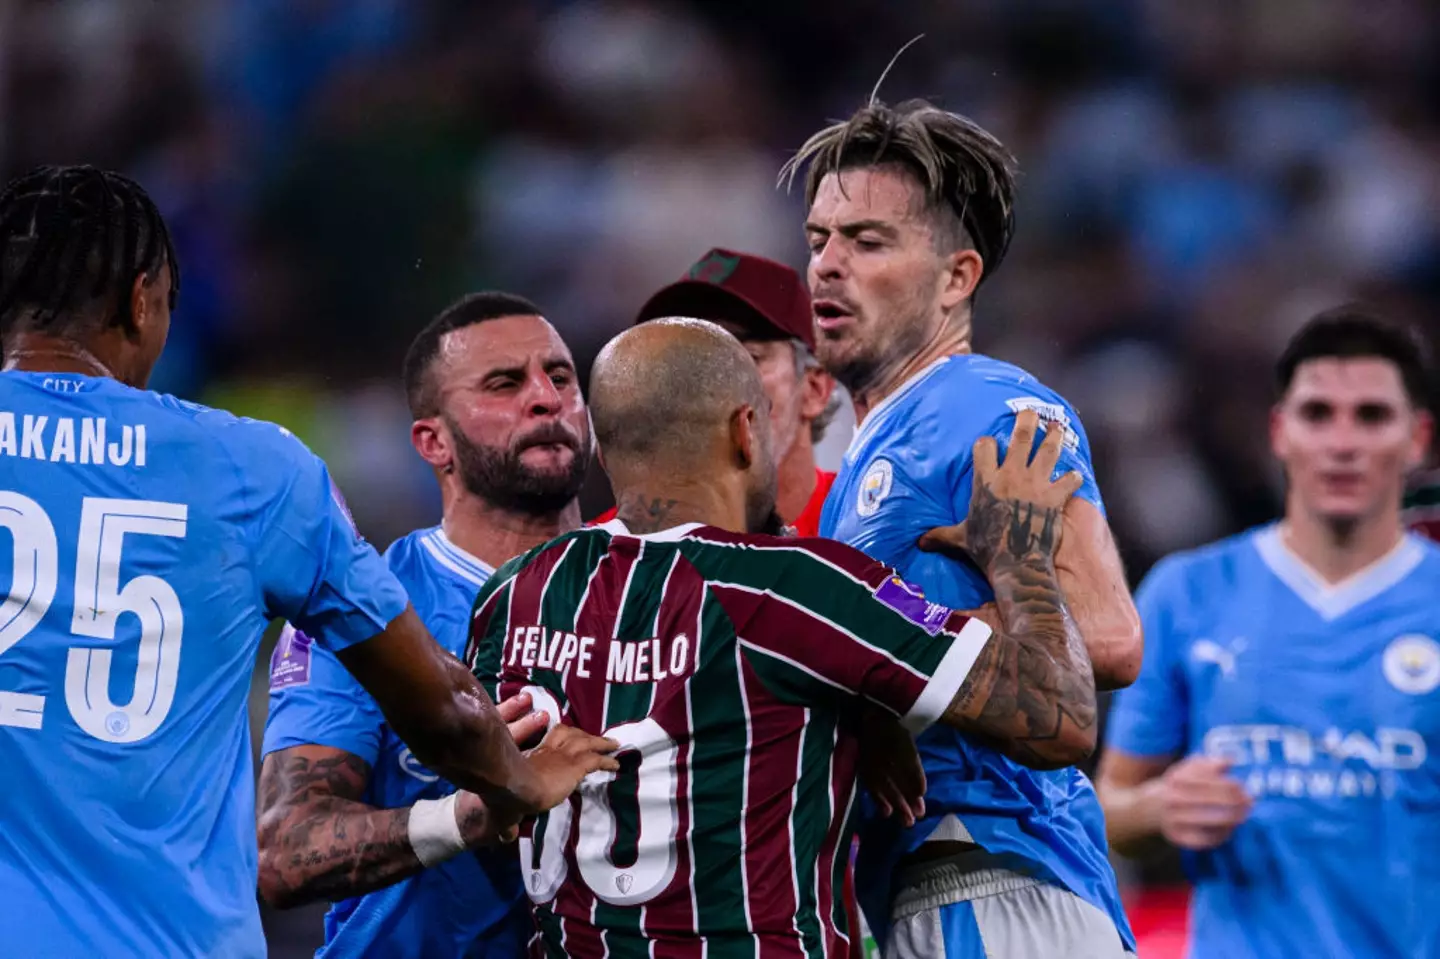 Grealish angered Fluminese players in the Club World Cup final (Image: Getty)